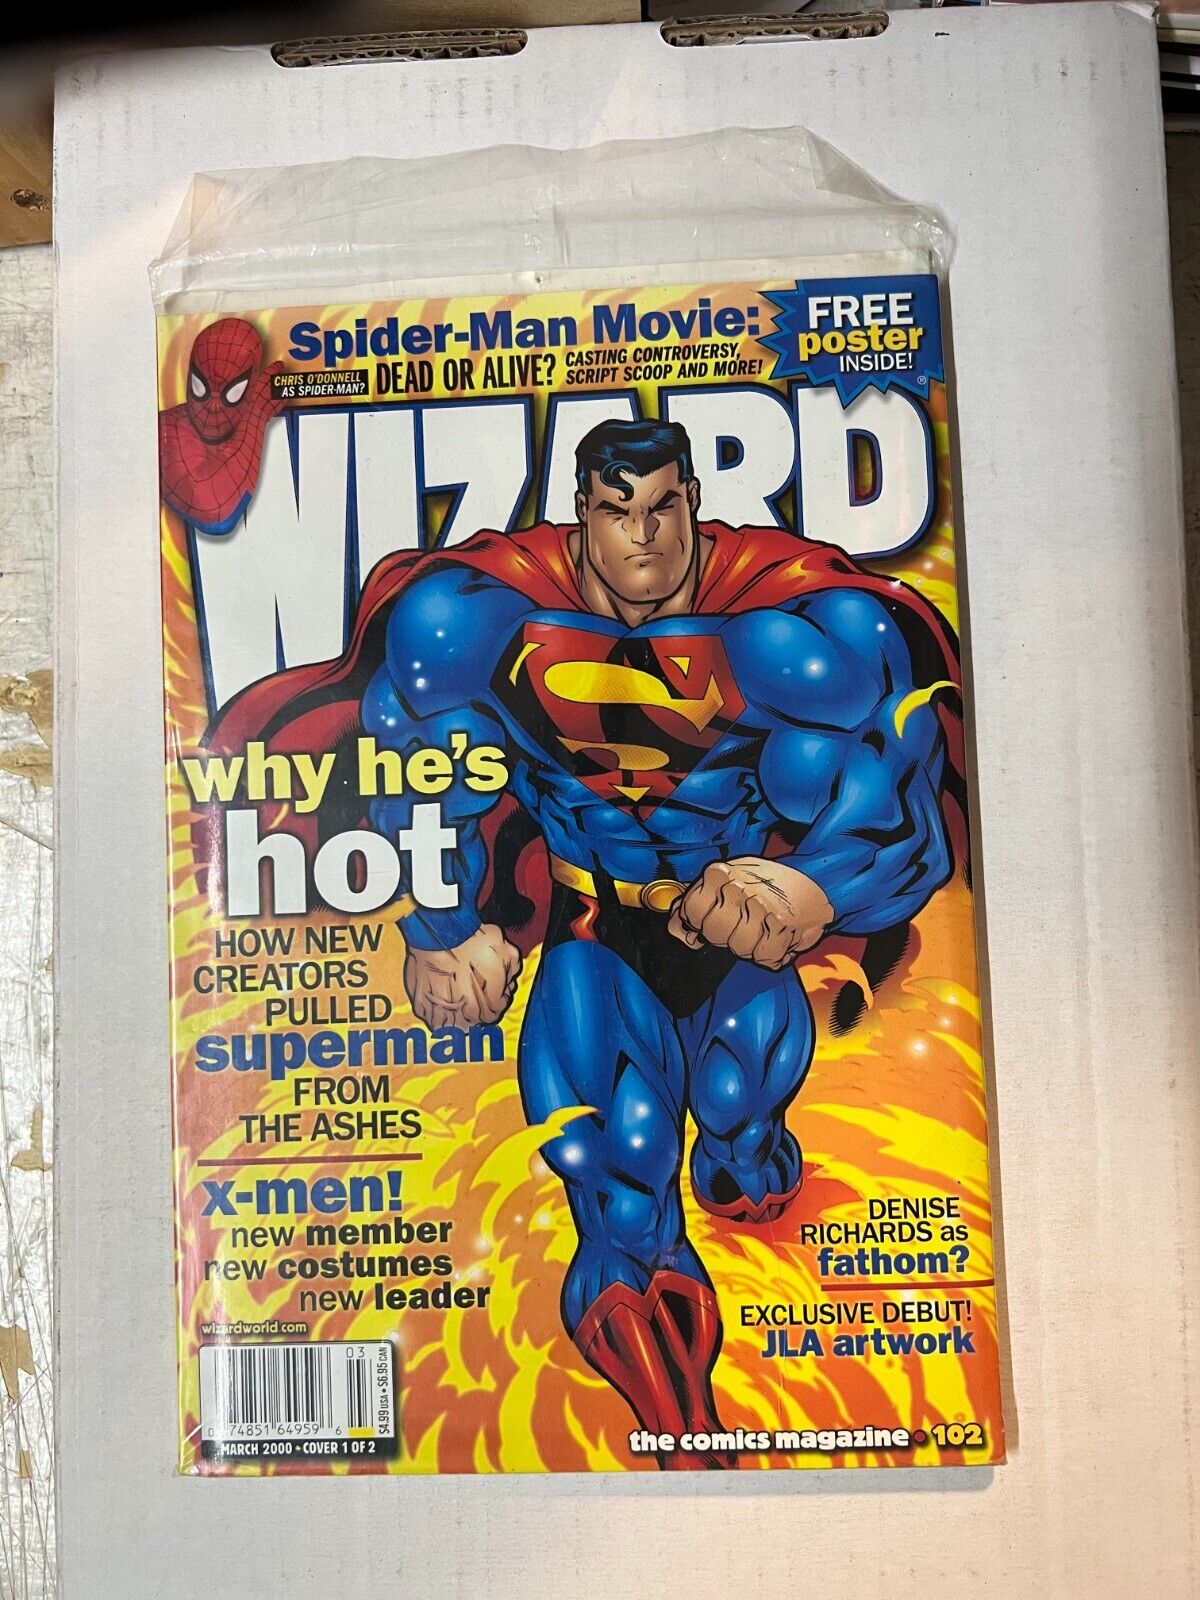 WIZARD: The Comics Magazine, March 2000, Cover 1 of 2 Issue 102 | Combined Shipp